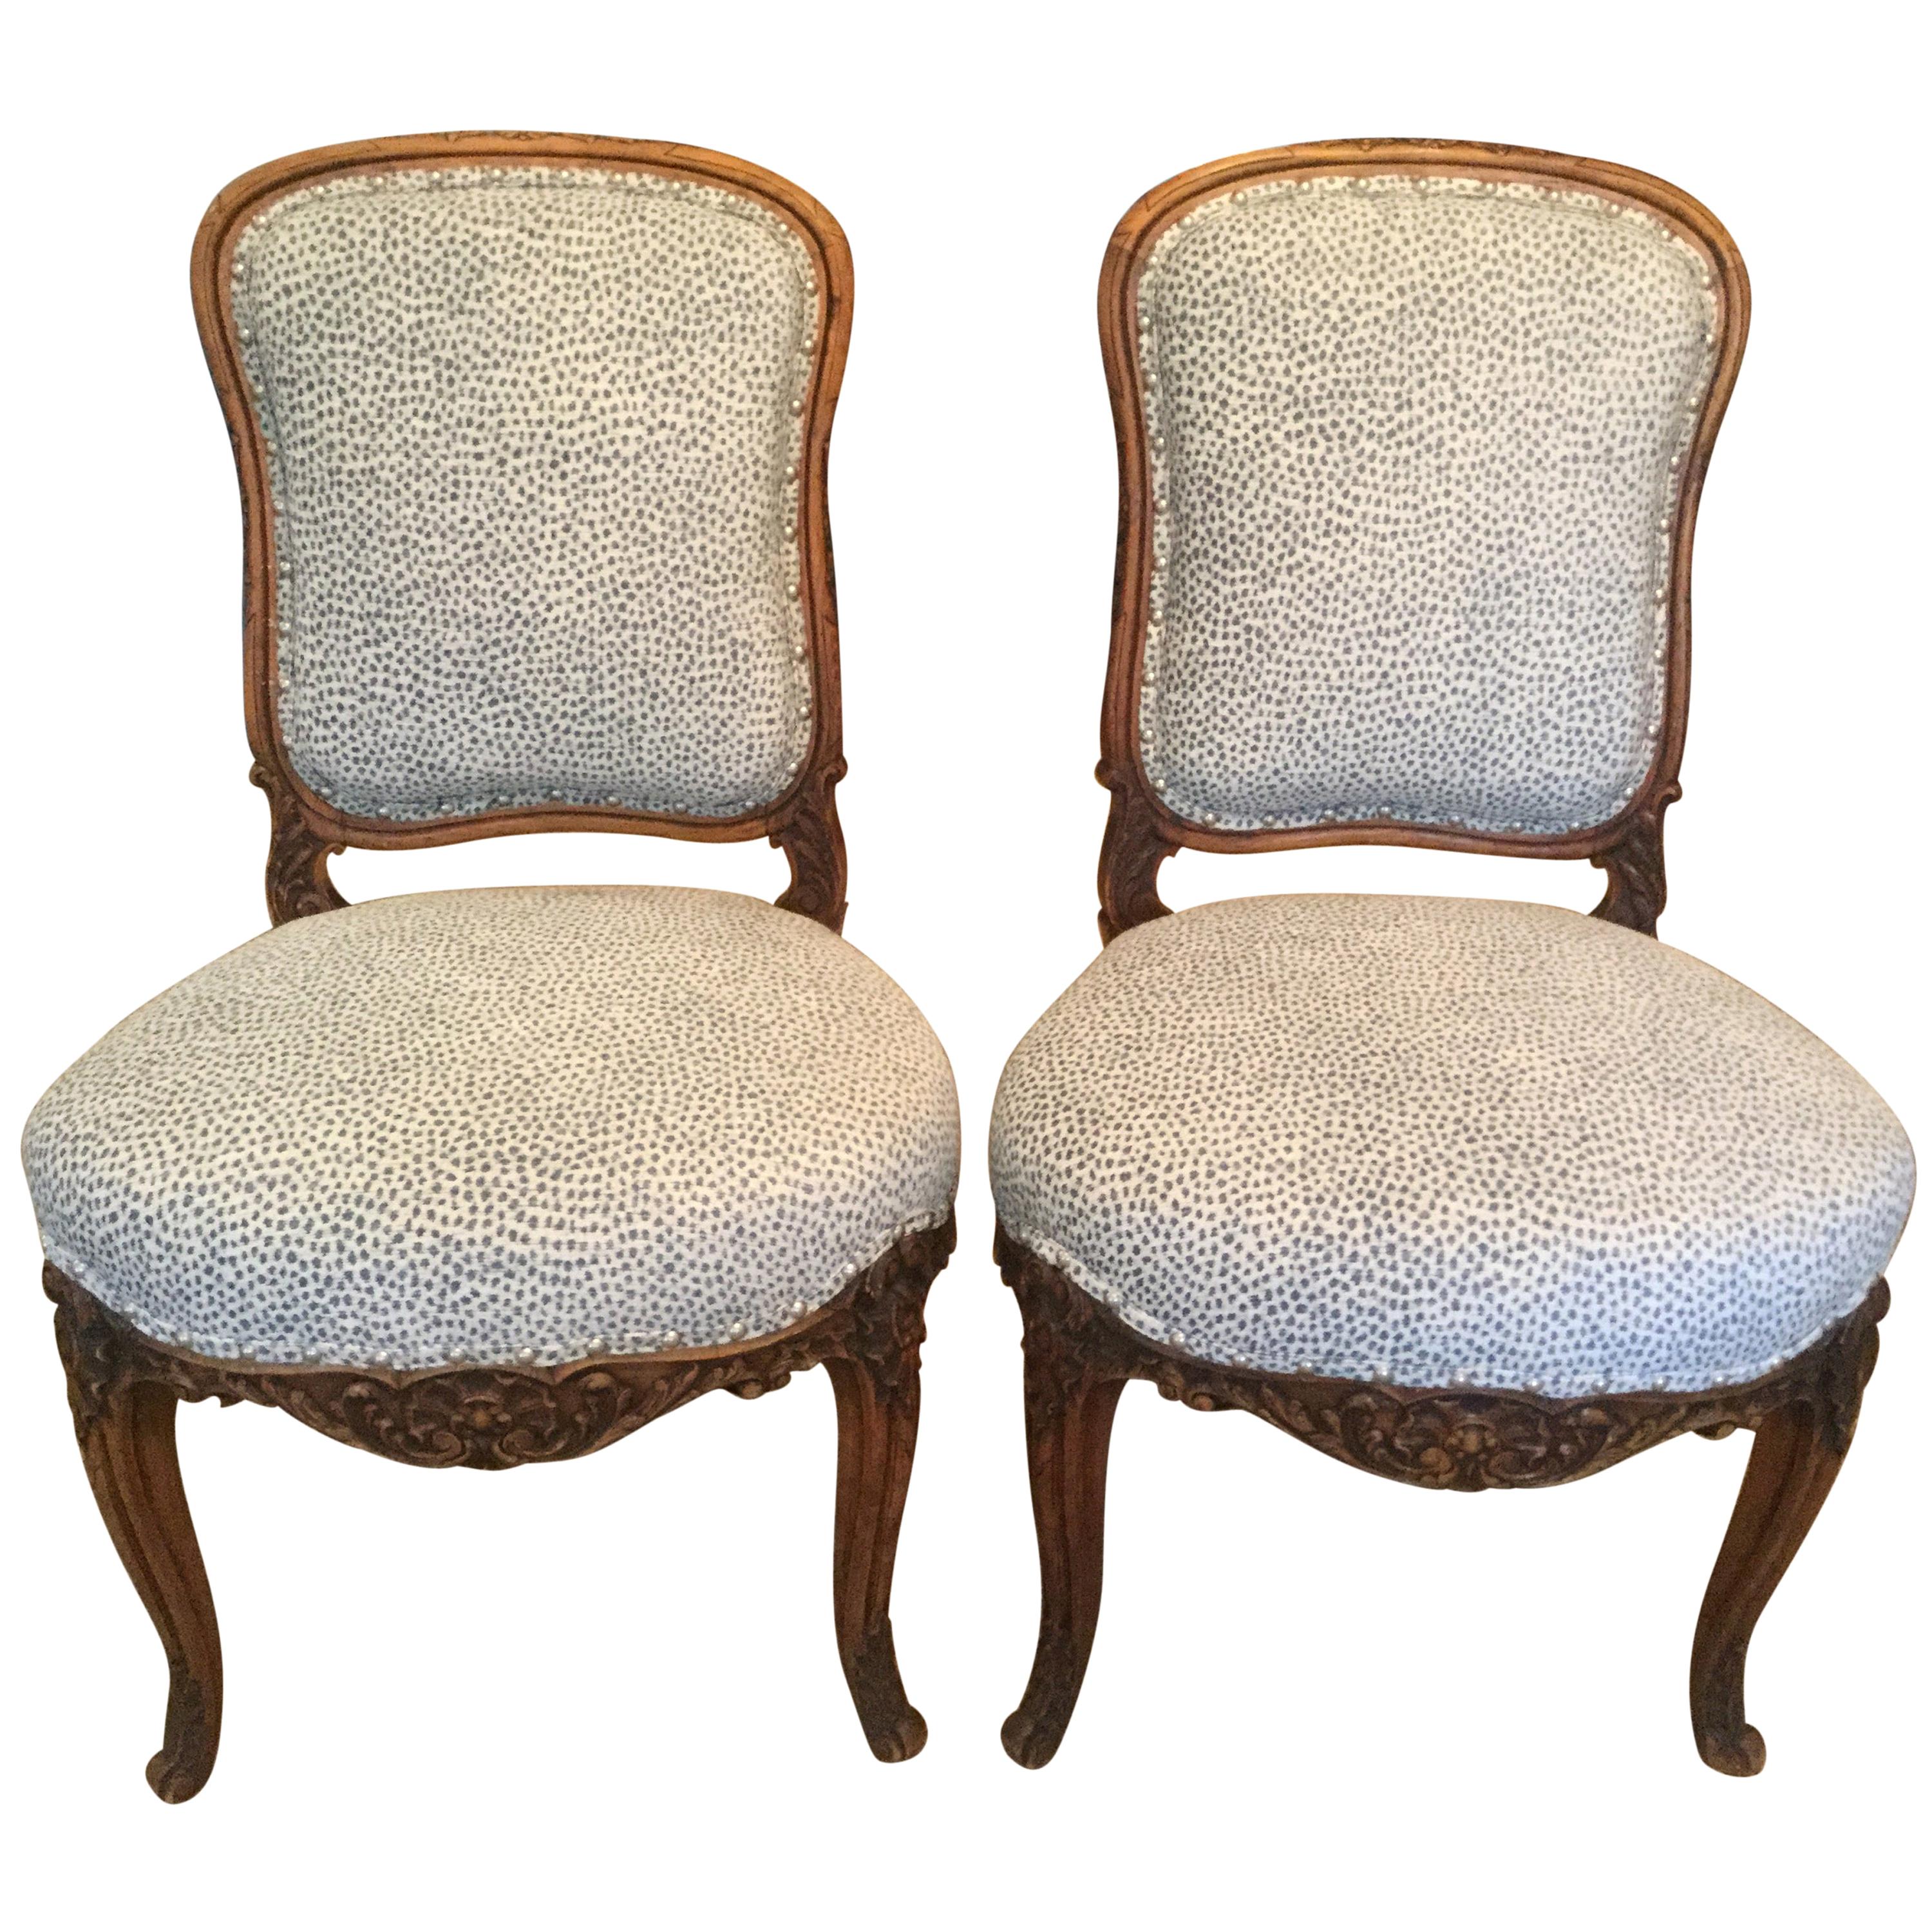 Pair of French Carved Walnut Side Chairs with Cheetah Blue and White Upholstery For Sale